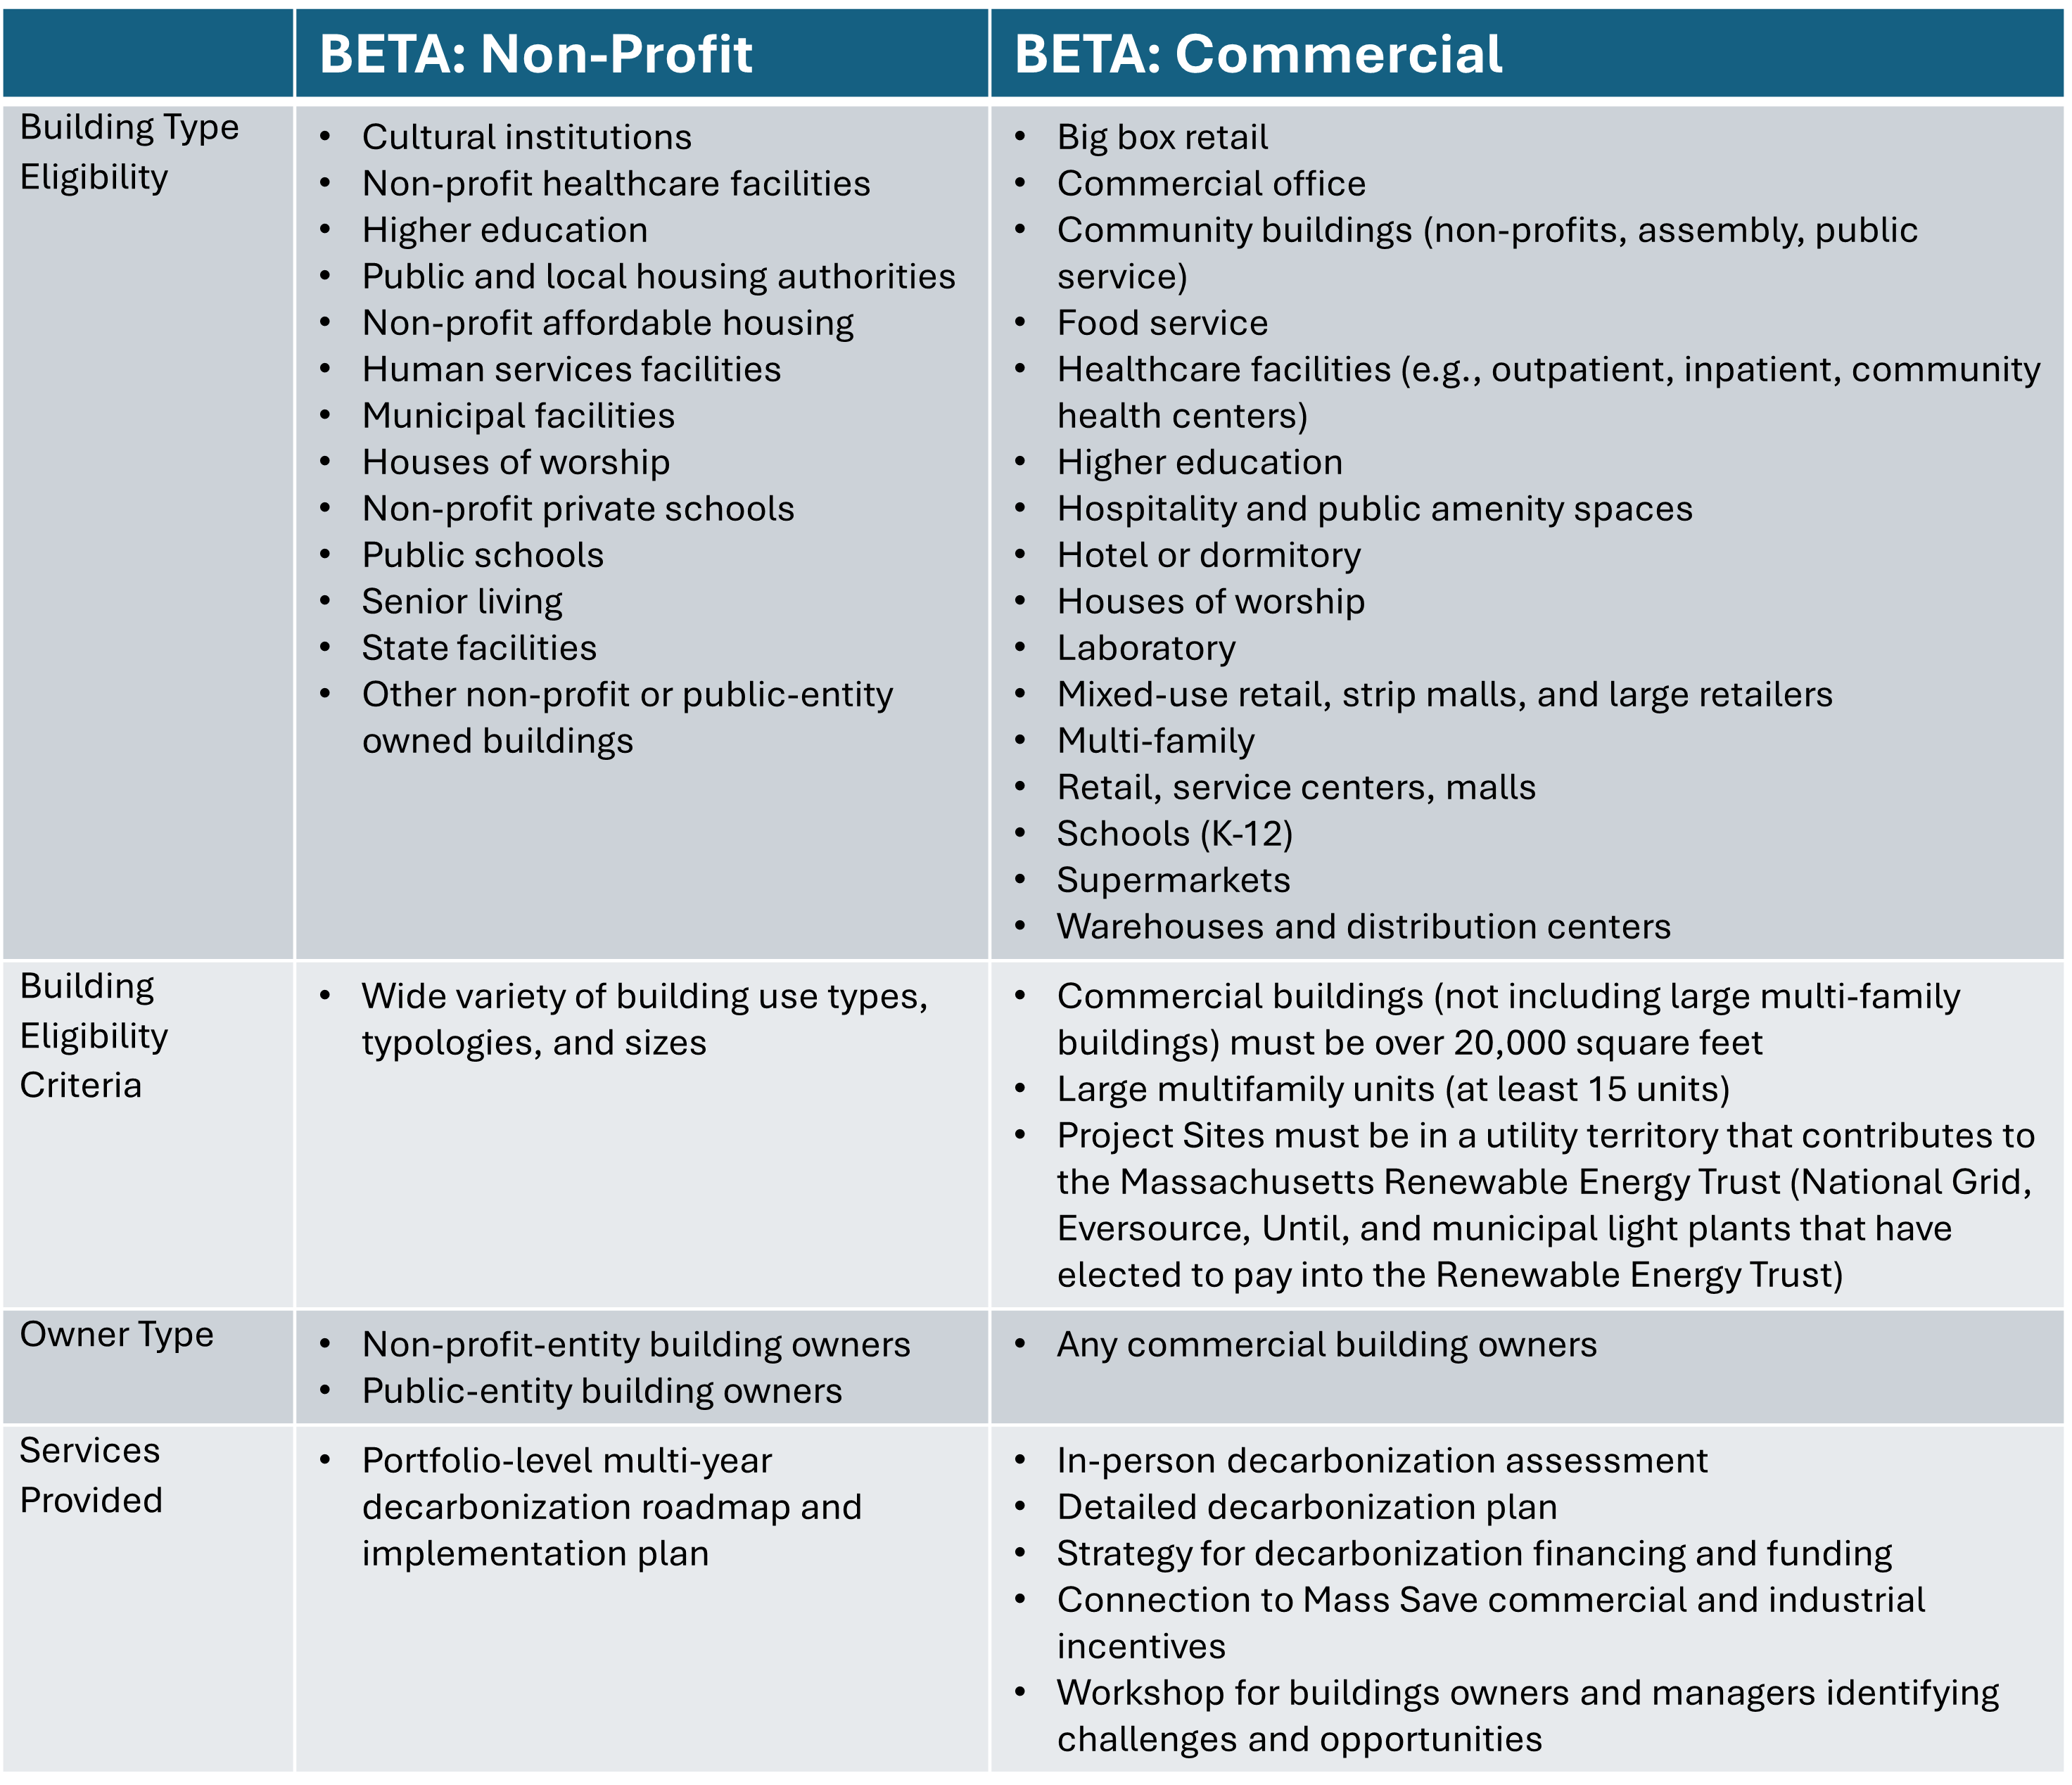 Table comparing BETA Non Profit and BETA Commercial